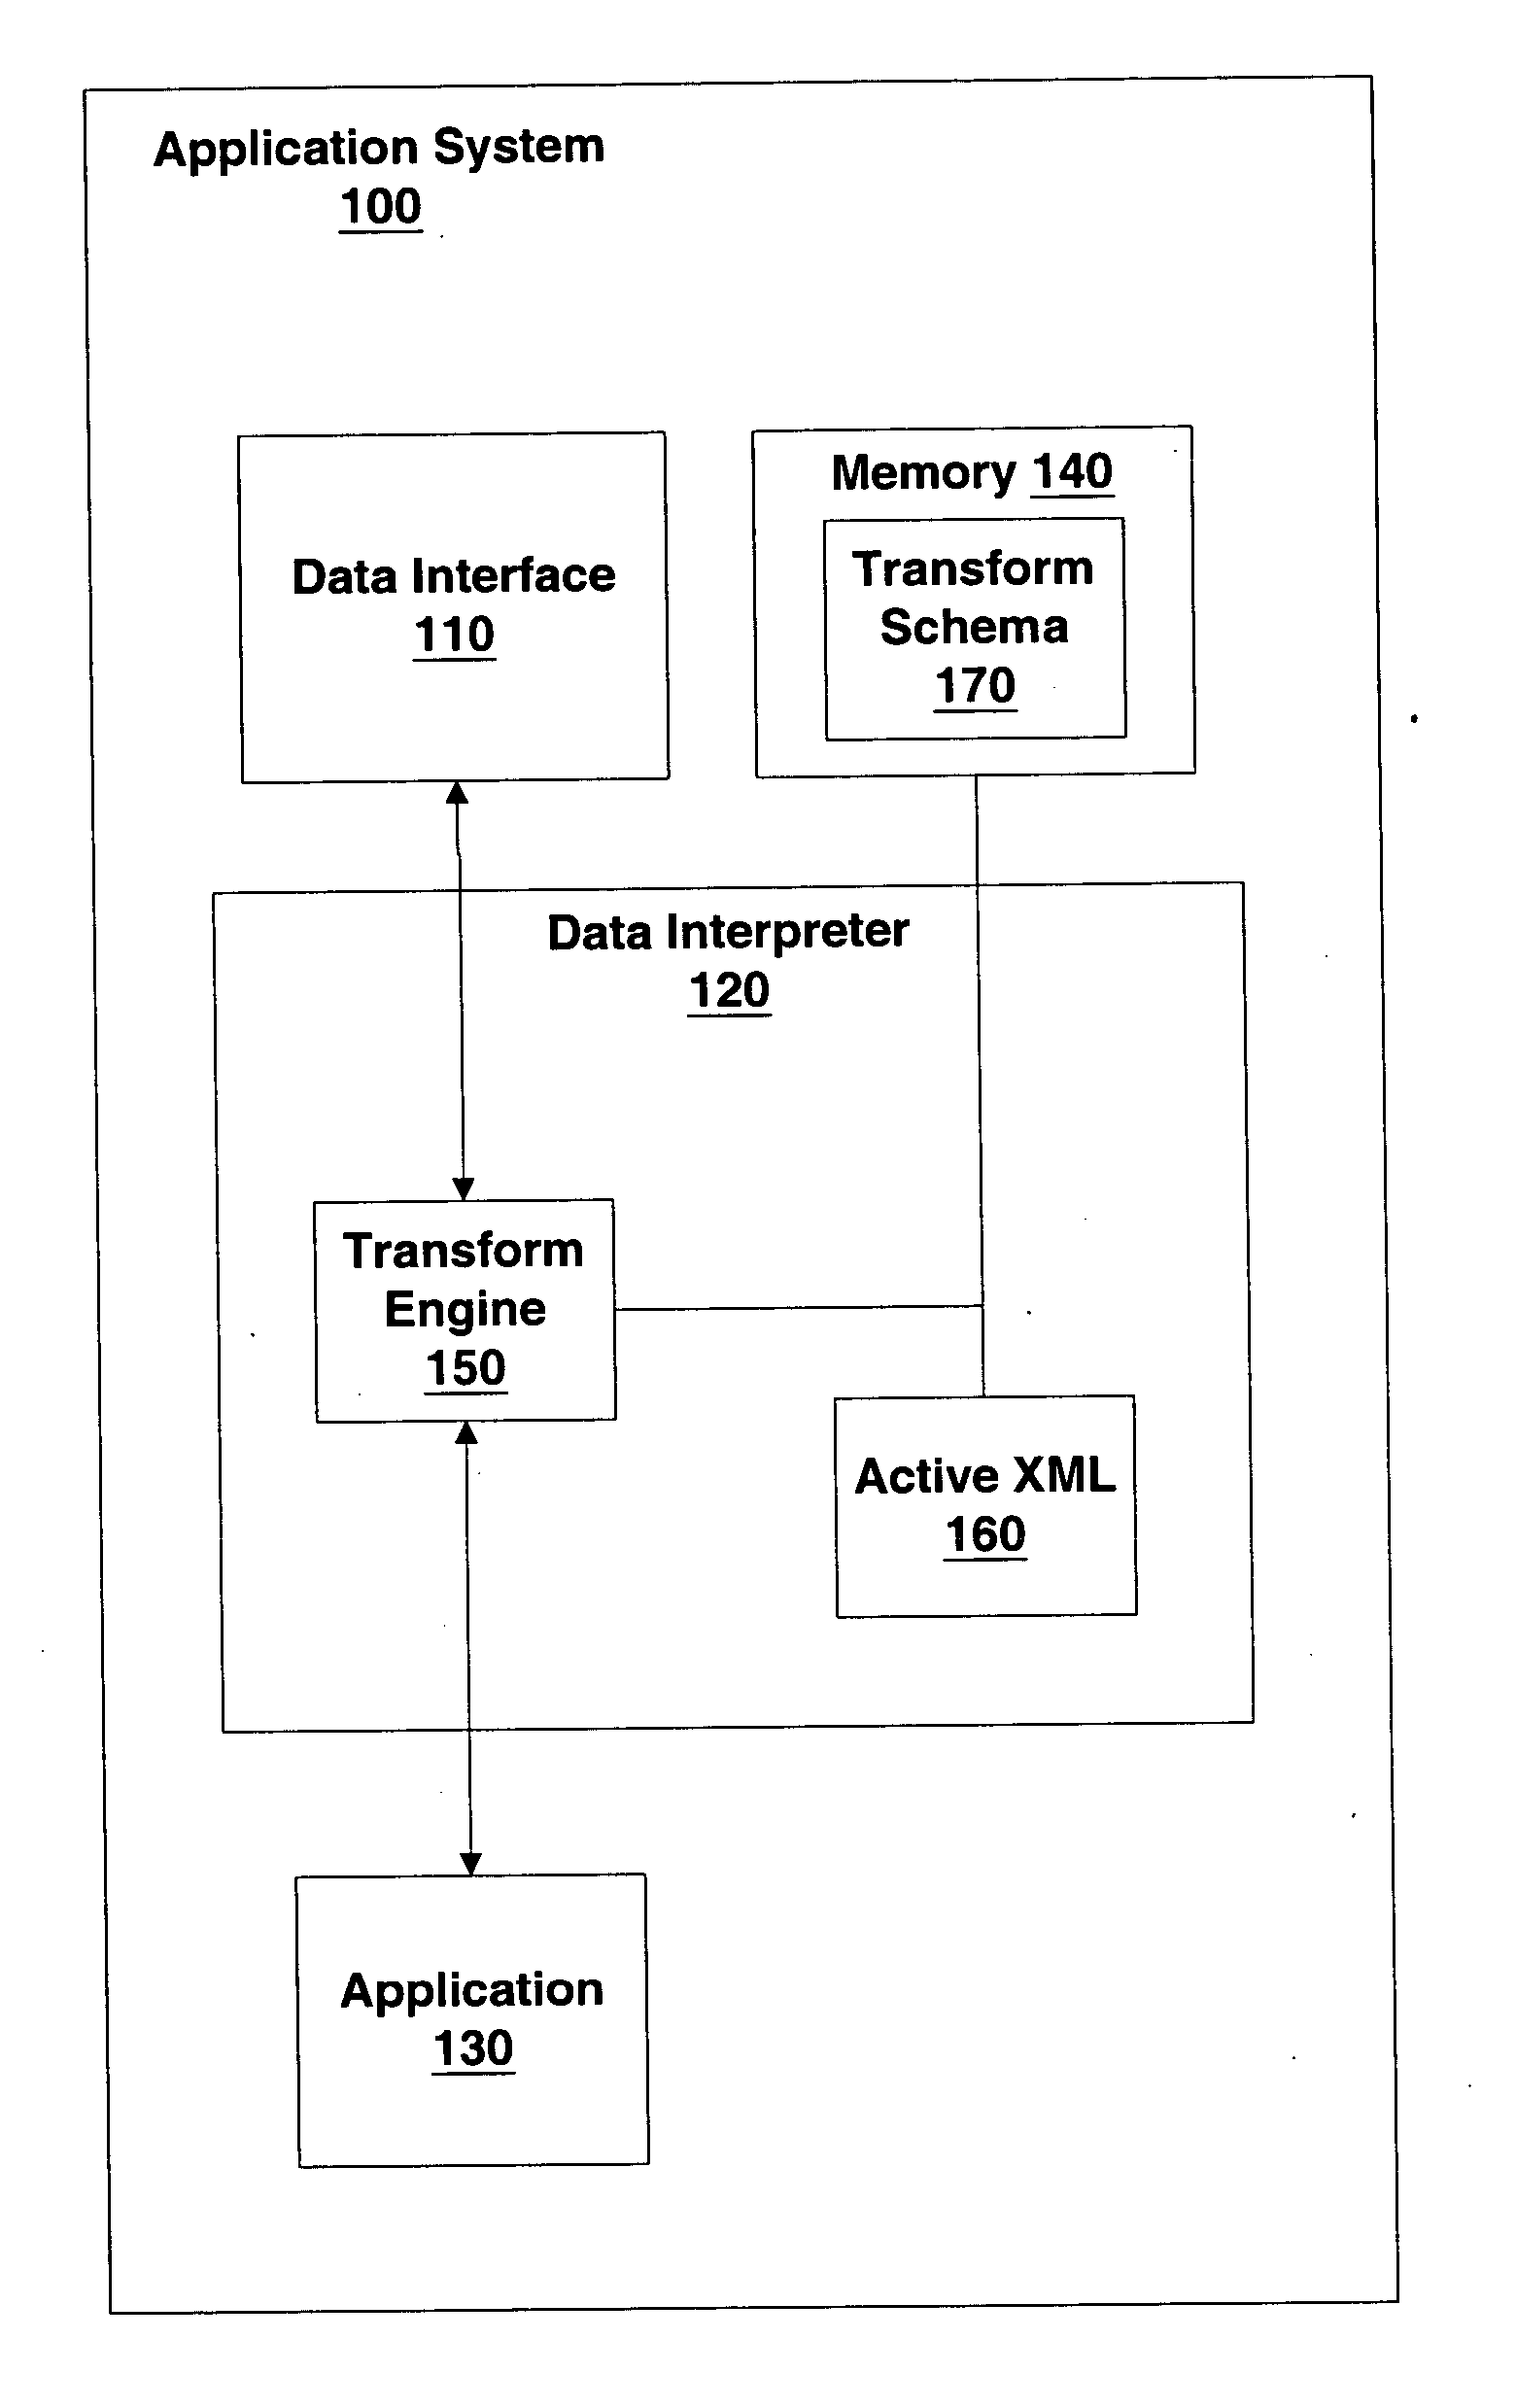 Application interface including dynamic transform definitions